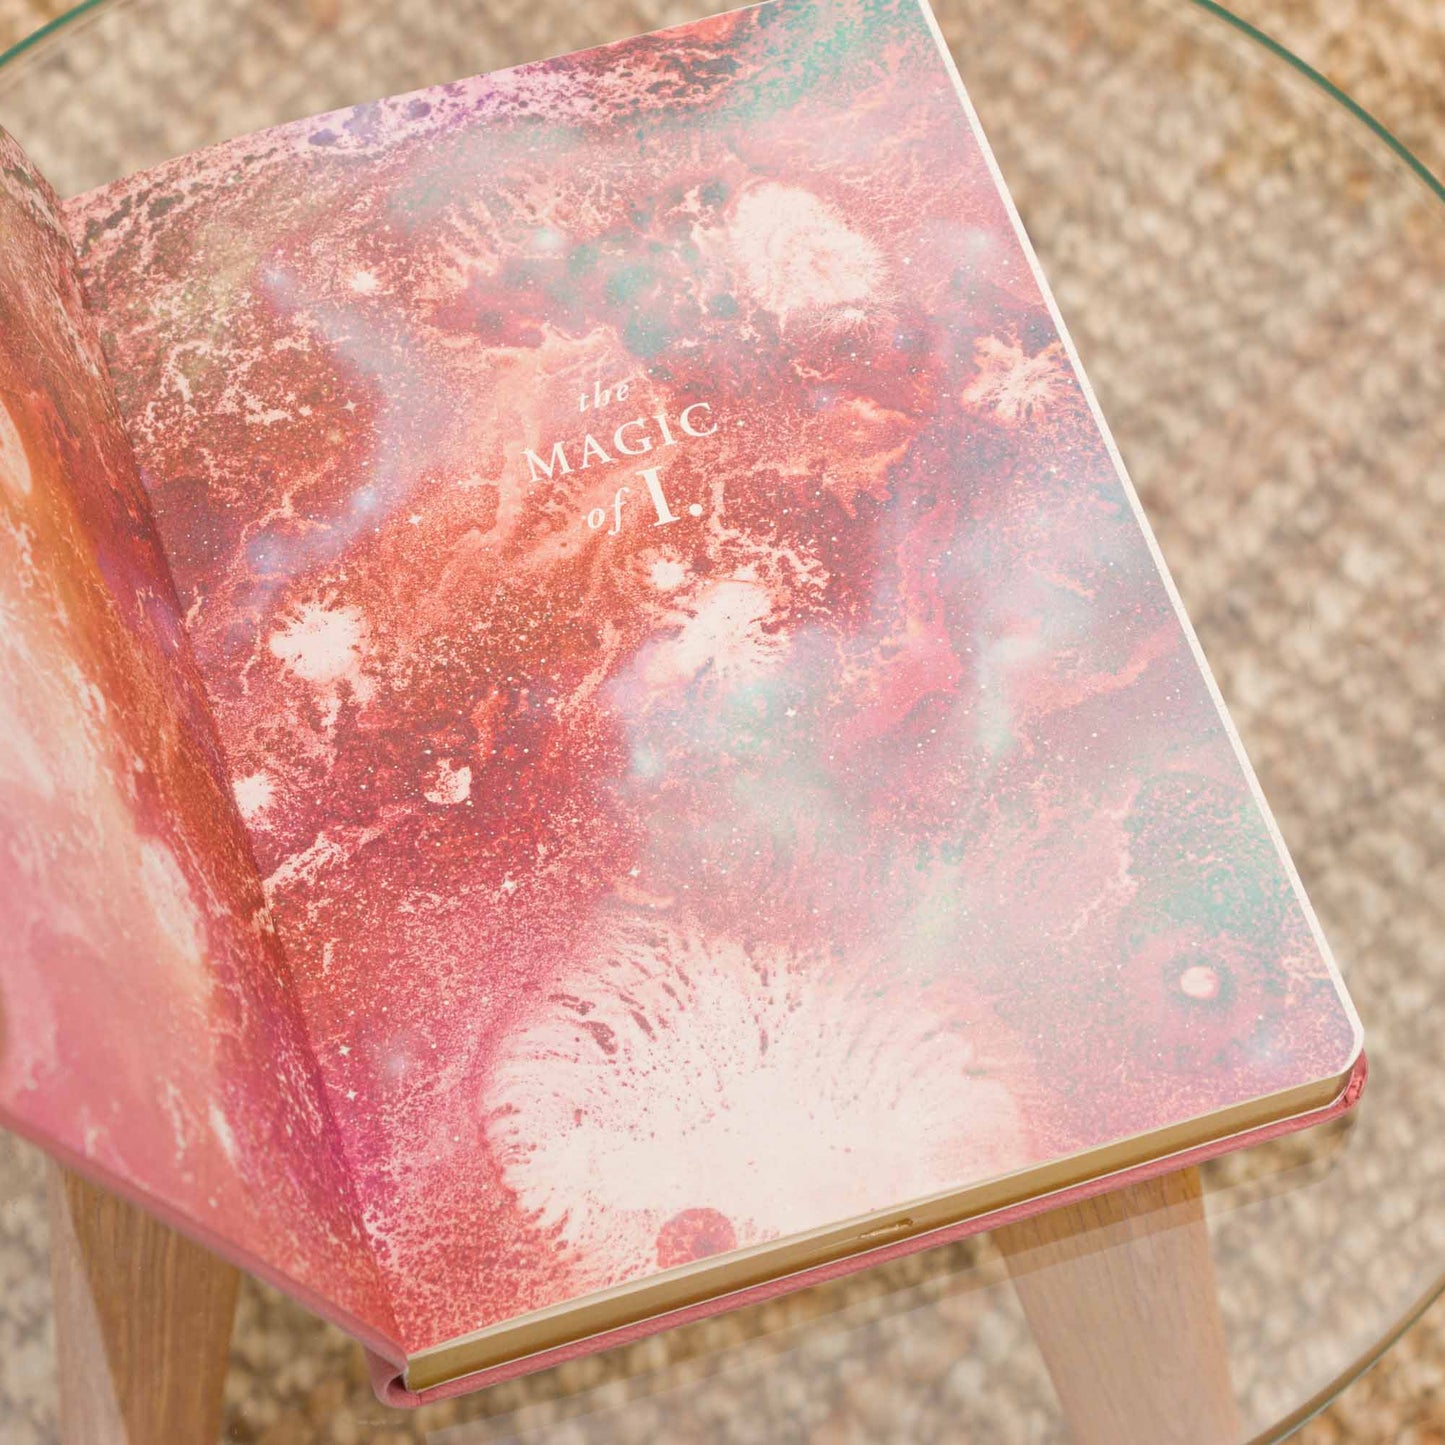 
                  
                    Magic of I Vegan Leather Journal - Lined
                  
                